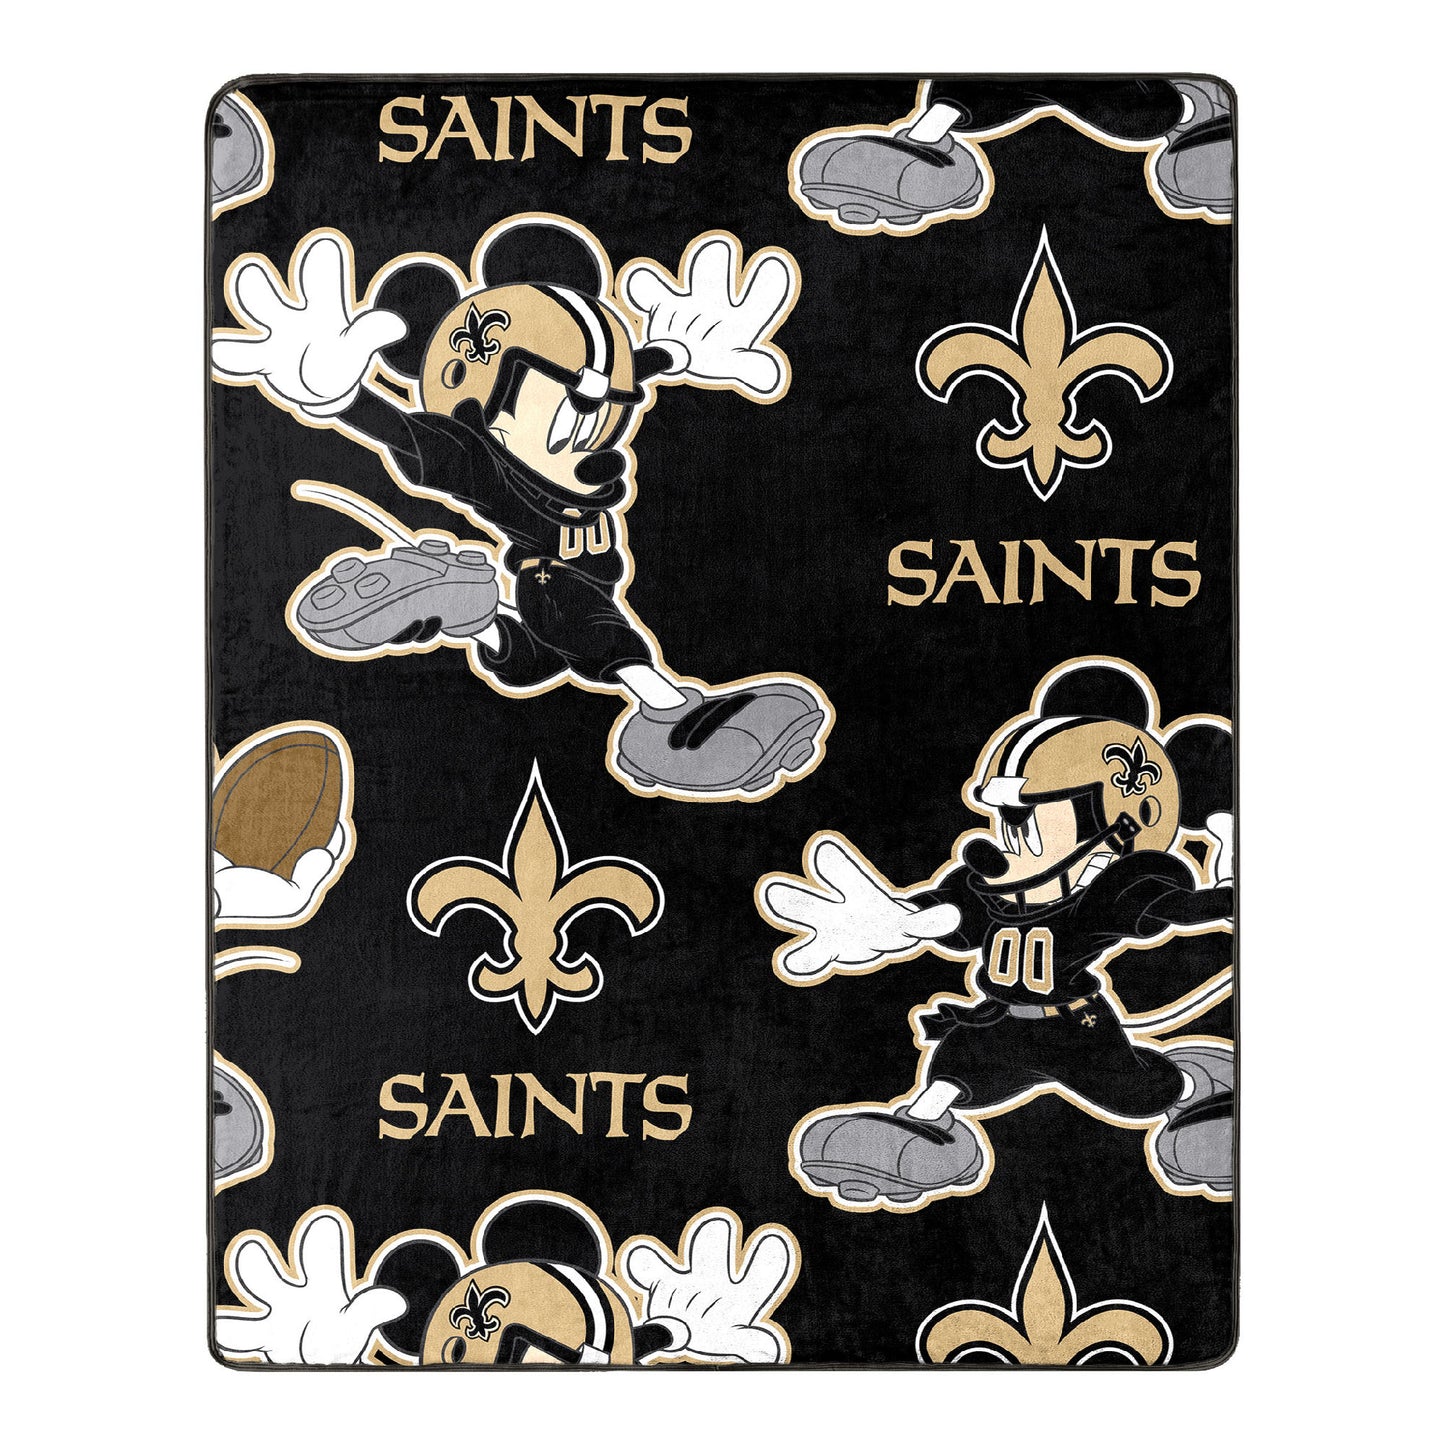 Saints OFFICIAL NFL & Disney's Mickey Mouse Character Hugger Pillow & Silk Touch Throw Set;  40" x 50"